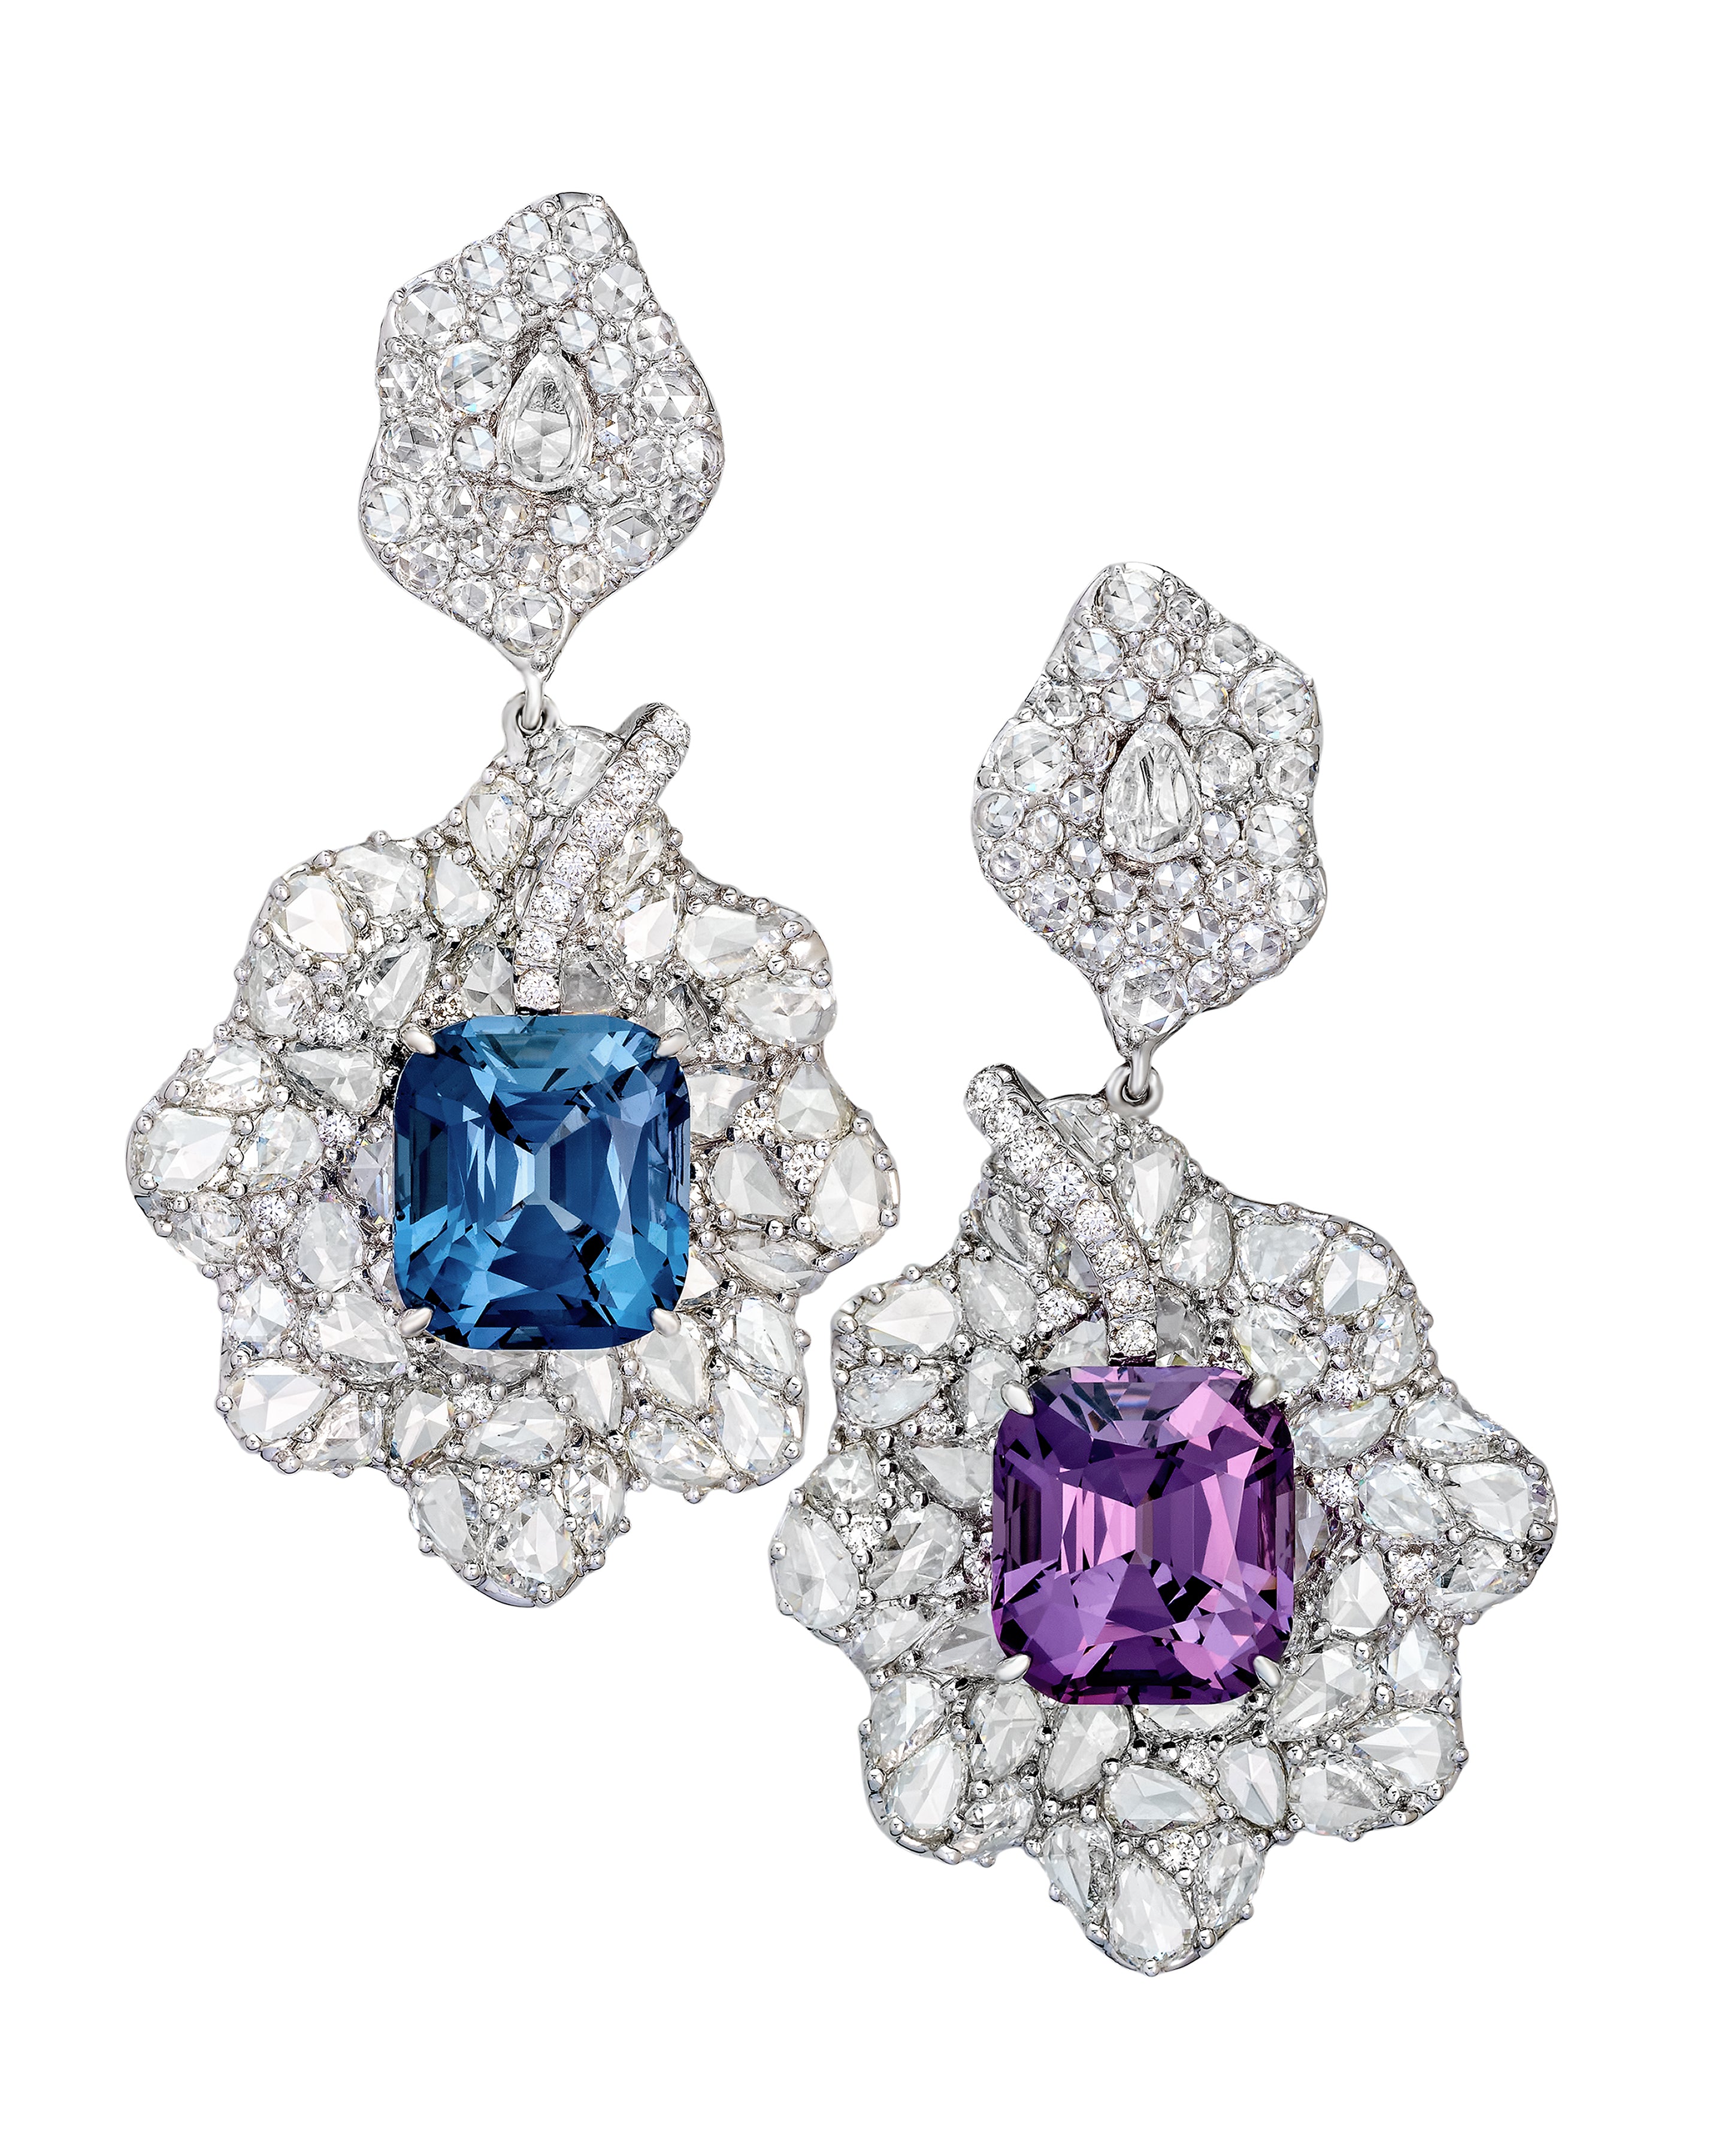 Spinel Mix Match Earrings with violet and blue 18.02ct spinels enhanced with diamonds, crafted in 18 karat white gold .